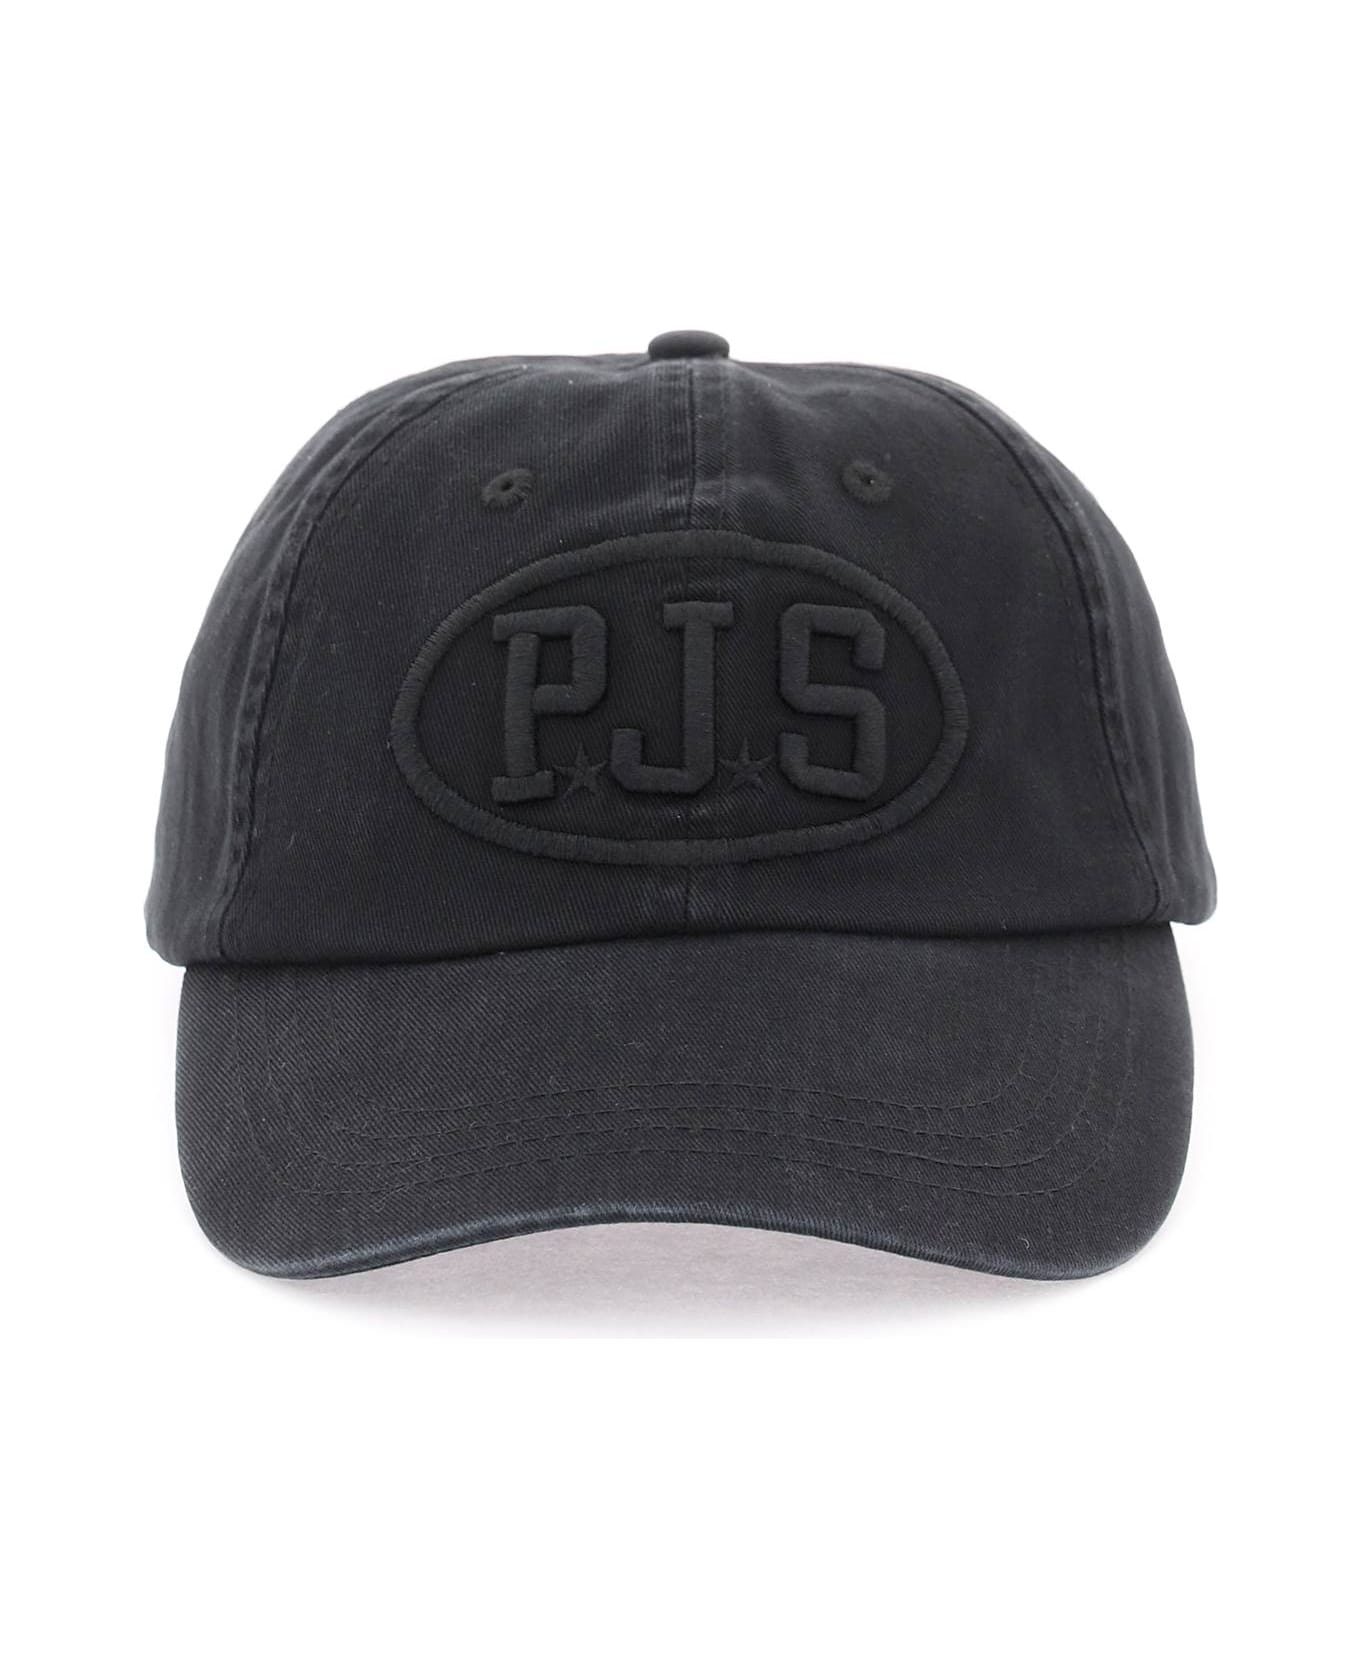 Parajumpers Baseball Cap With Embroidery - BLACK (Black) コート